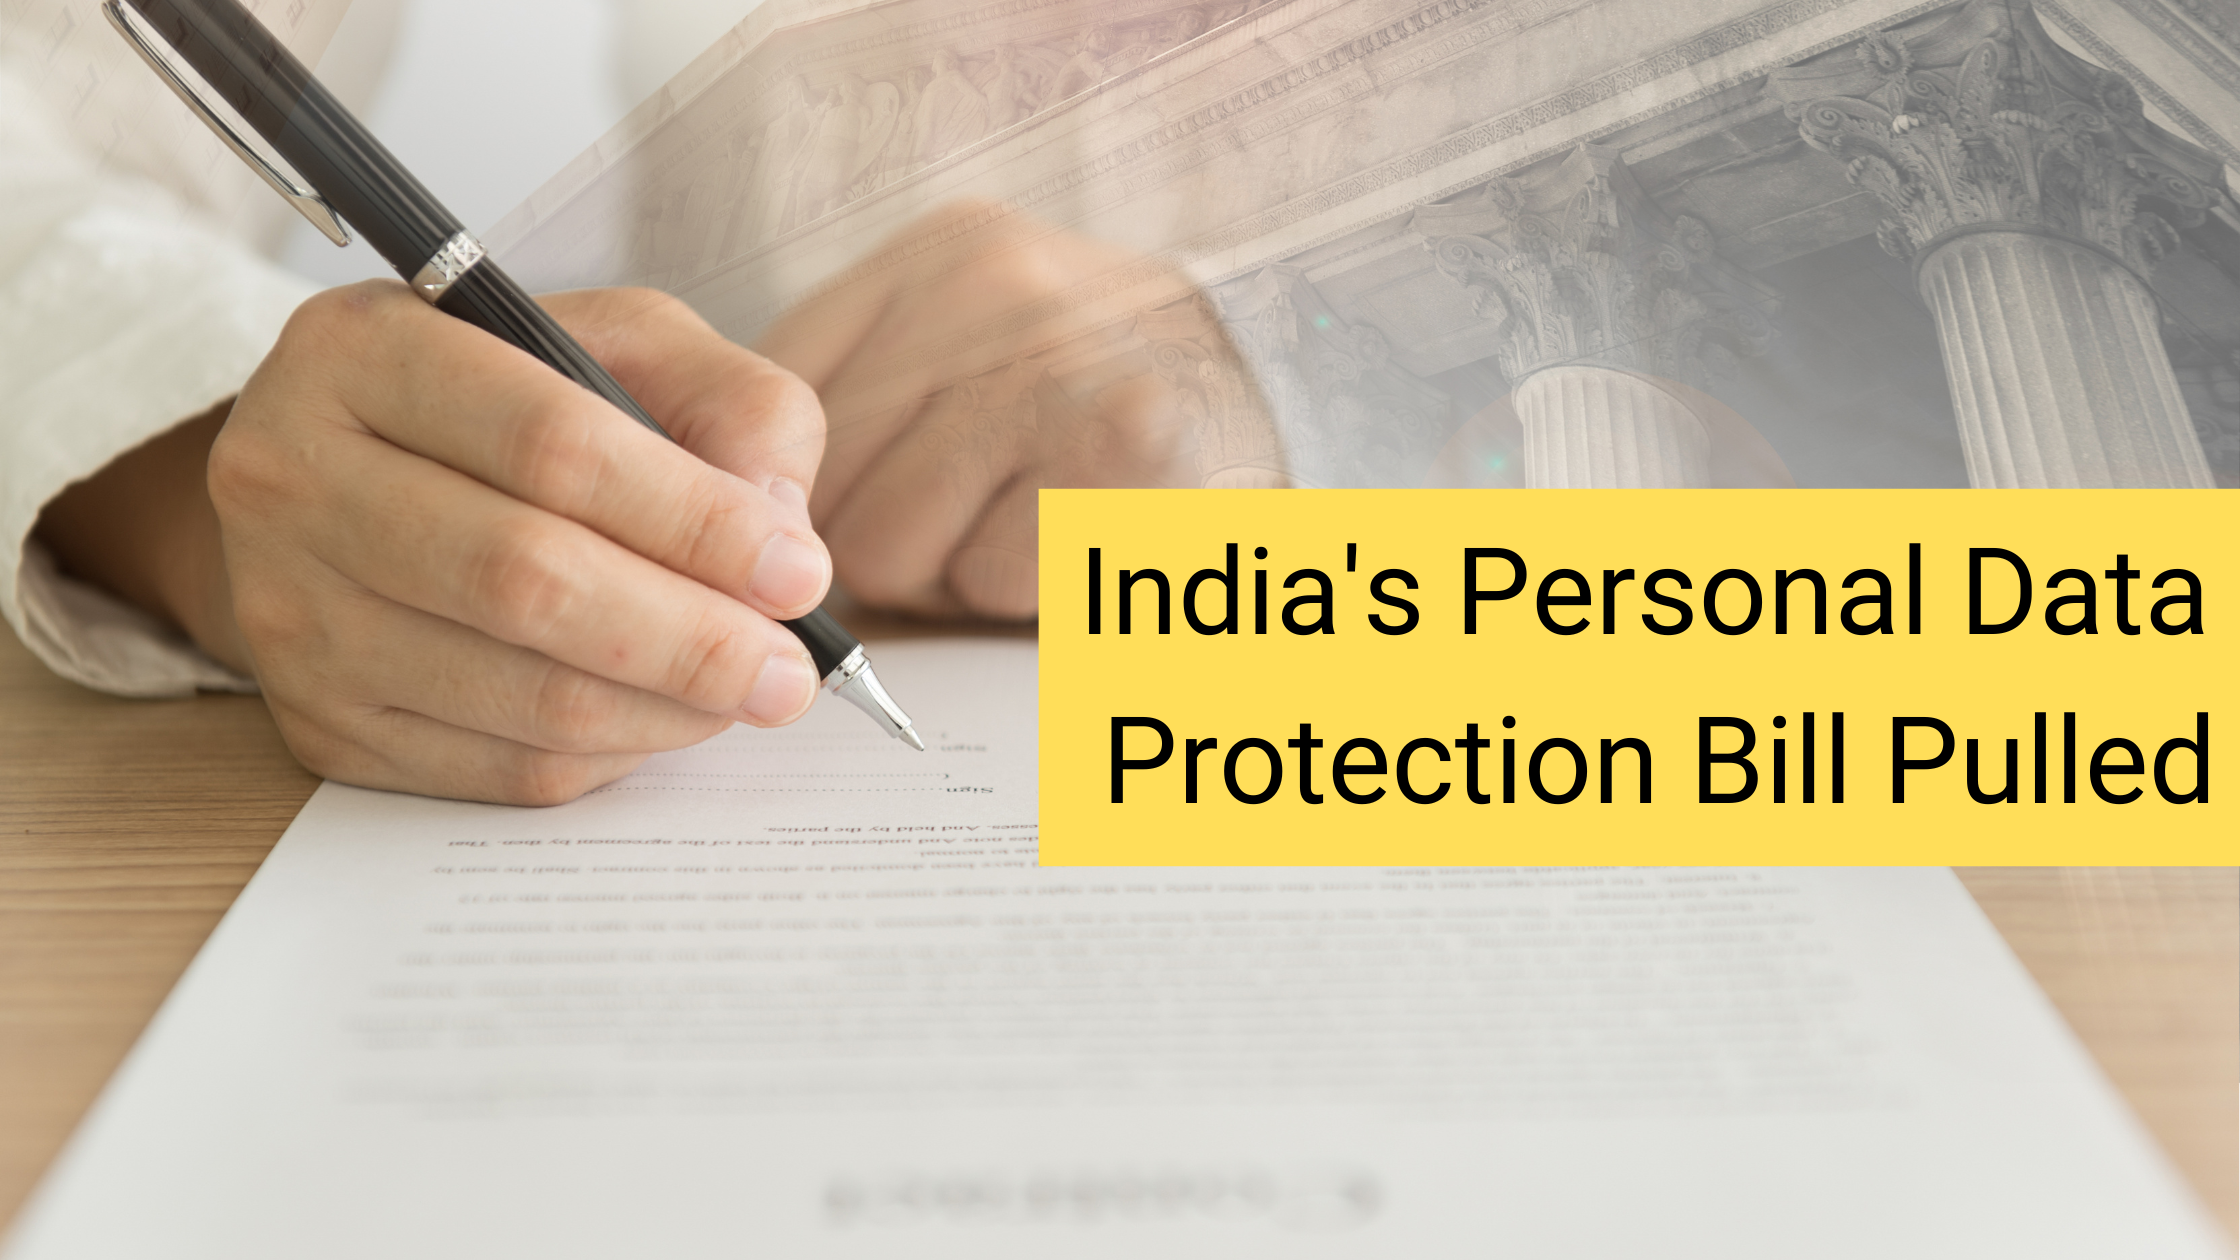 India's Personal Data Protection Bill Pulled